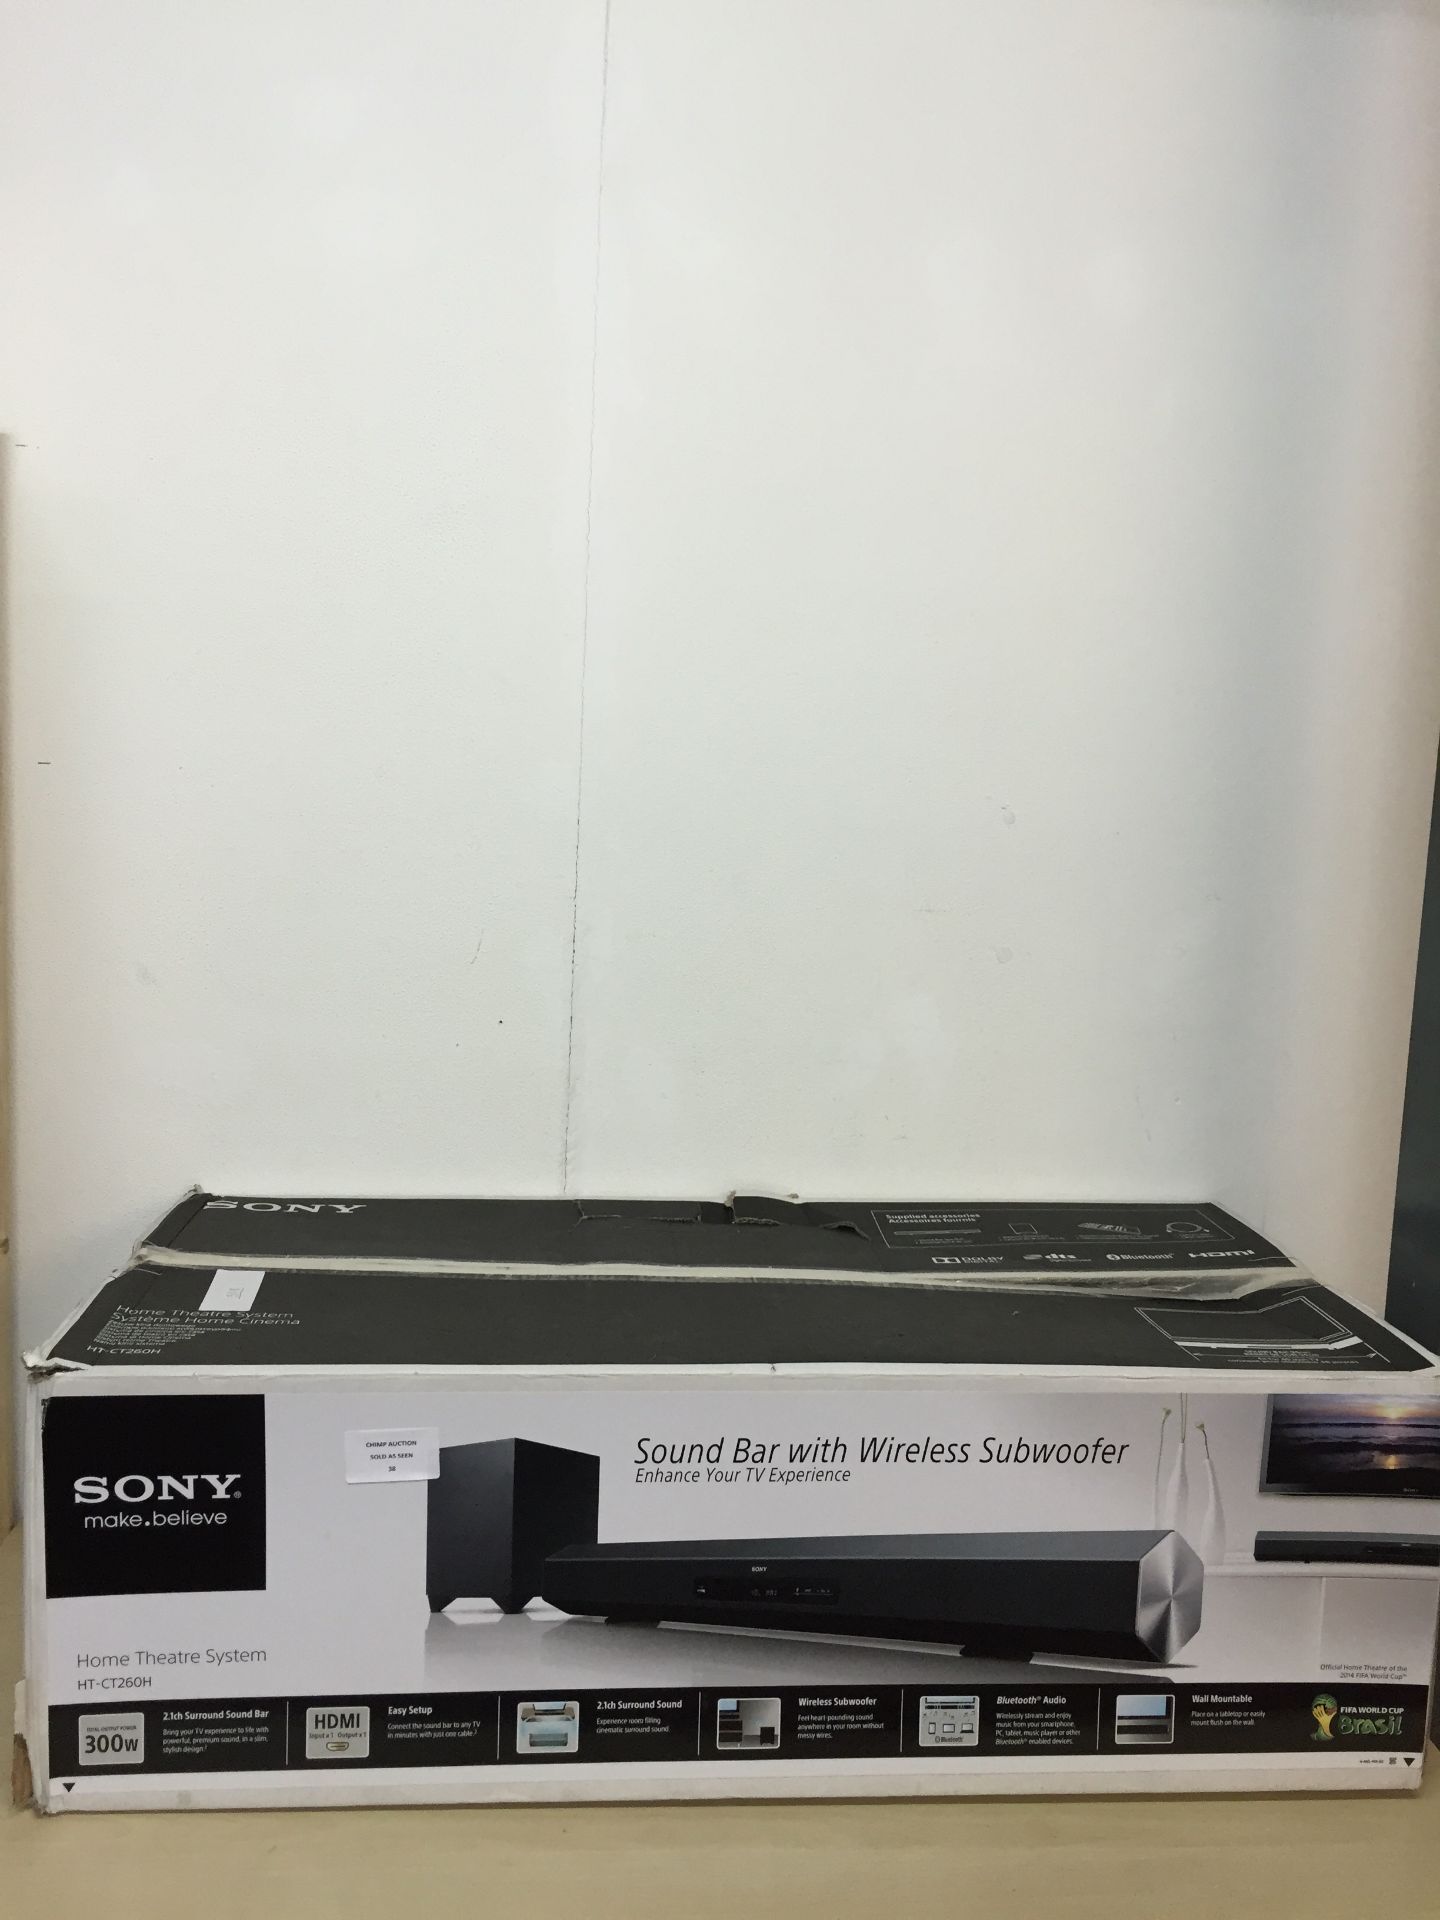 BOXED SONY HT-CT260H SOUND BAR WITH WIRELESS SUB HOME THEATRE SYSTEM RRP £299.99